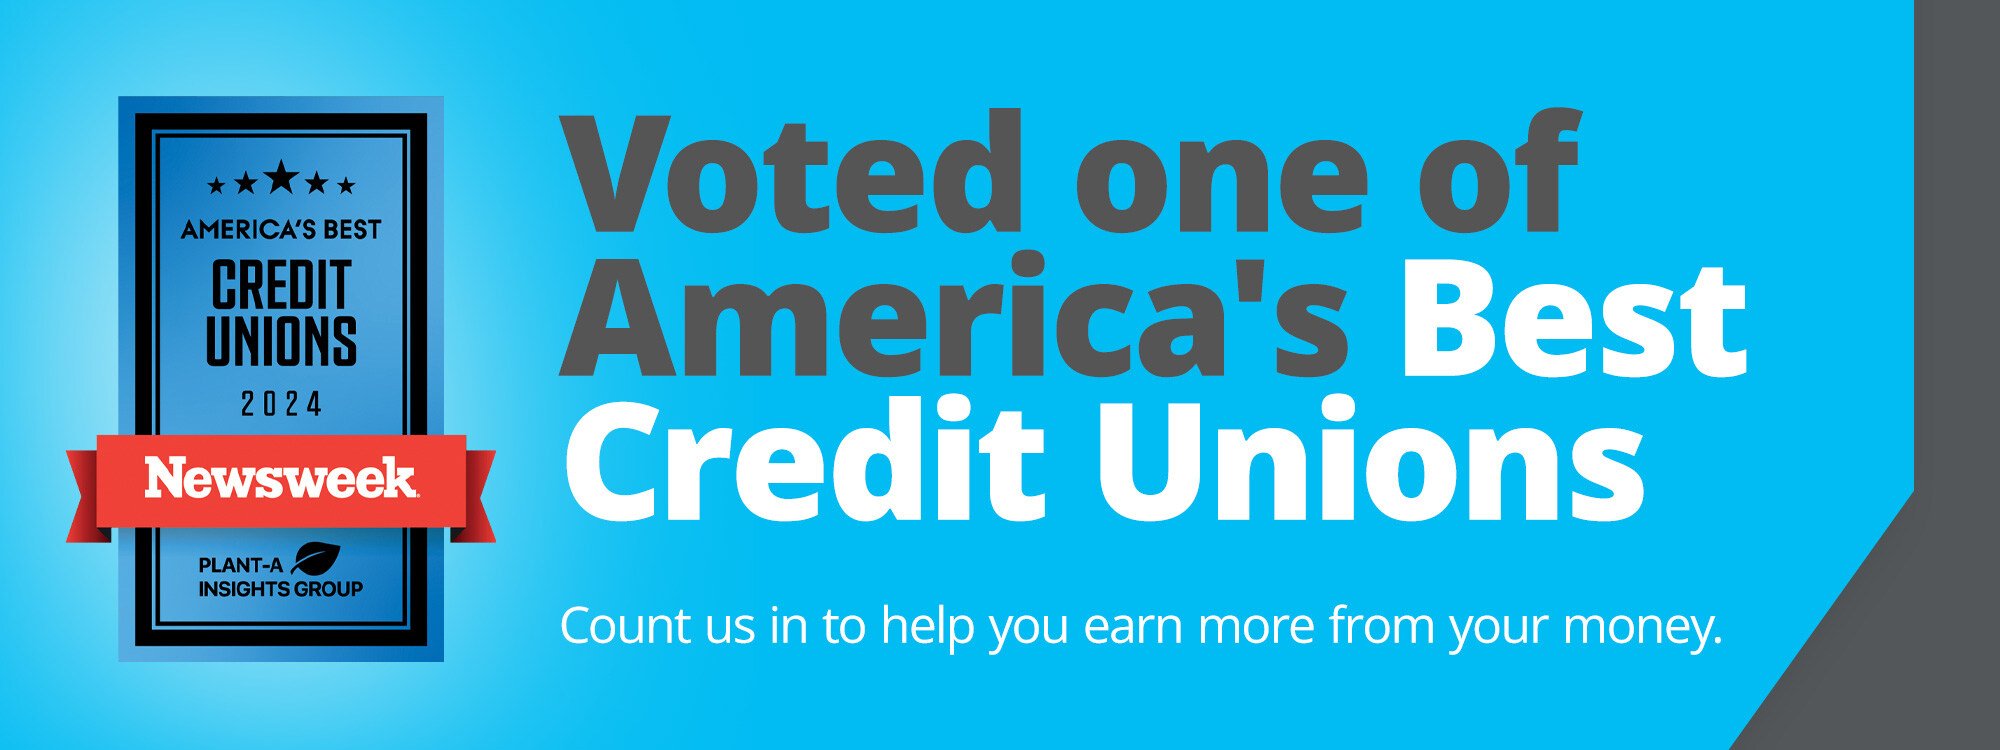 Voted one of America's Best Credit Unions